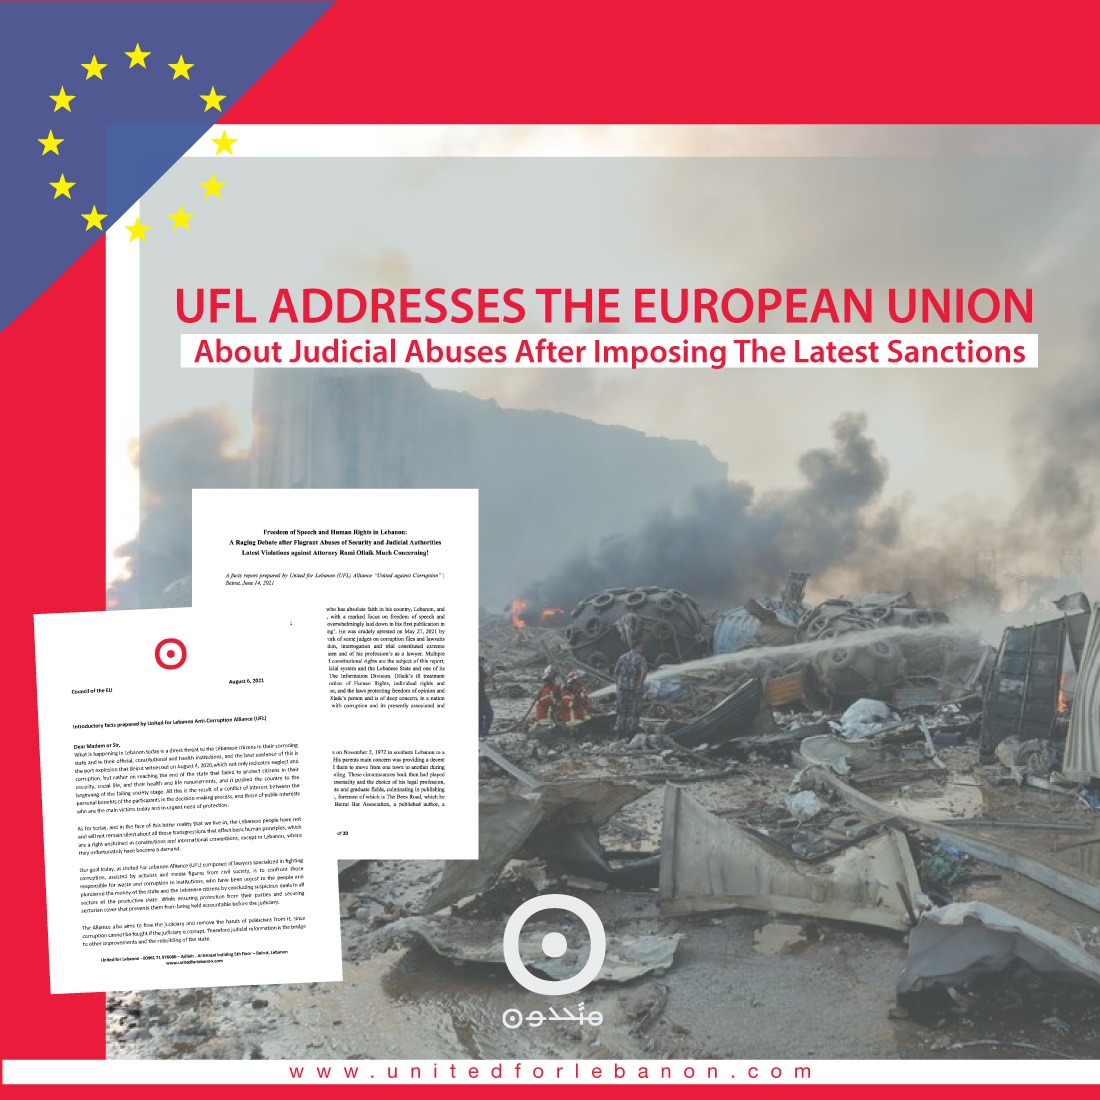 UFL addresses the European Union about judicial abuses after imposing the latest sanctions